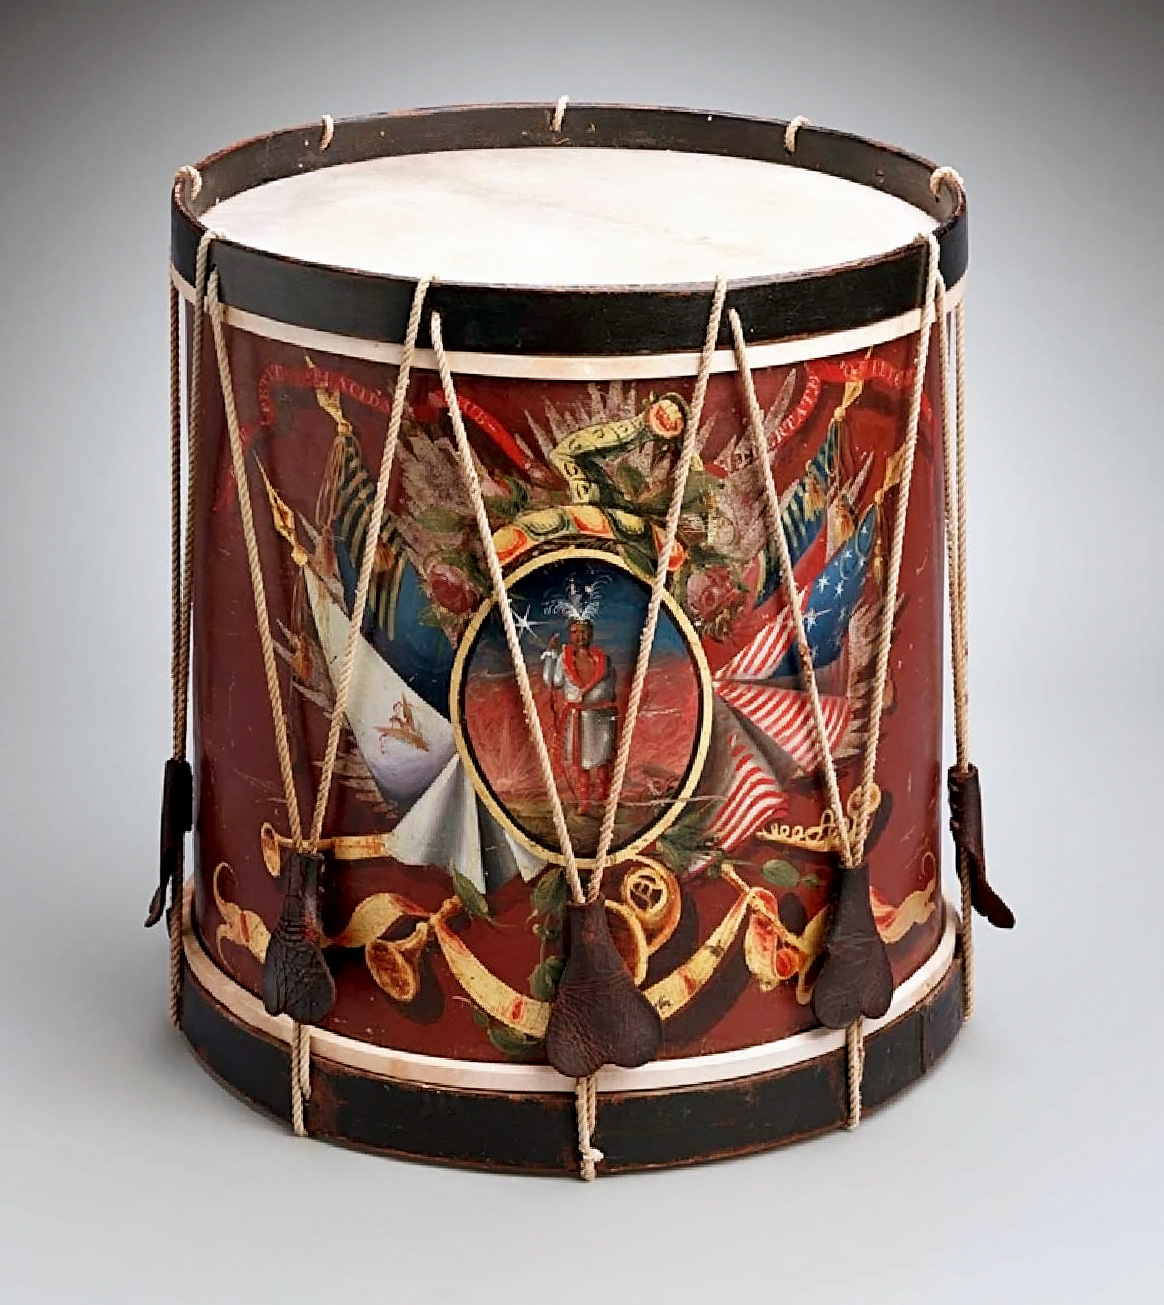 Probably painted by Charles Hubbard, side drum, 1824